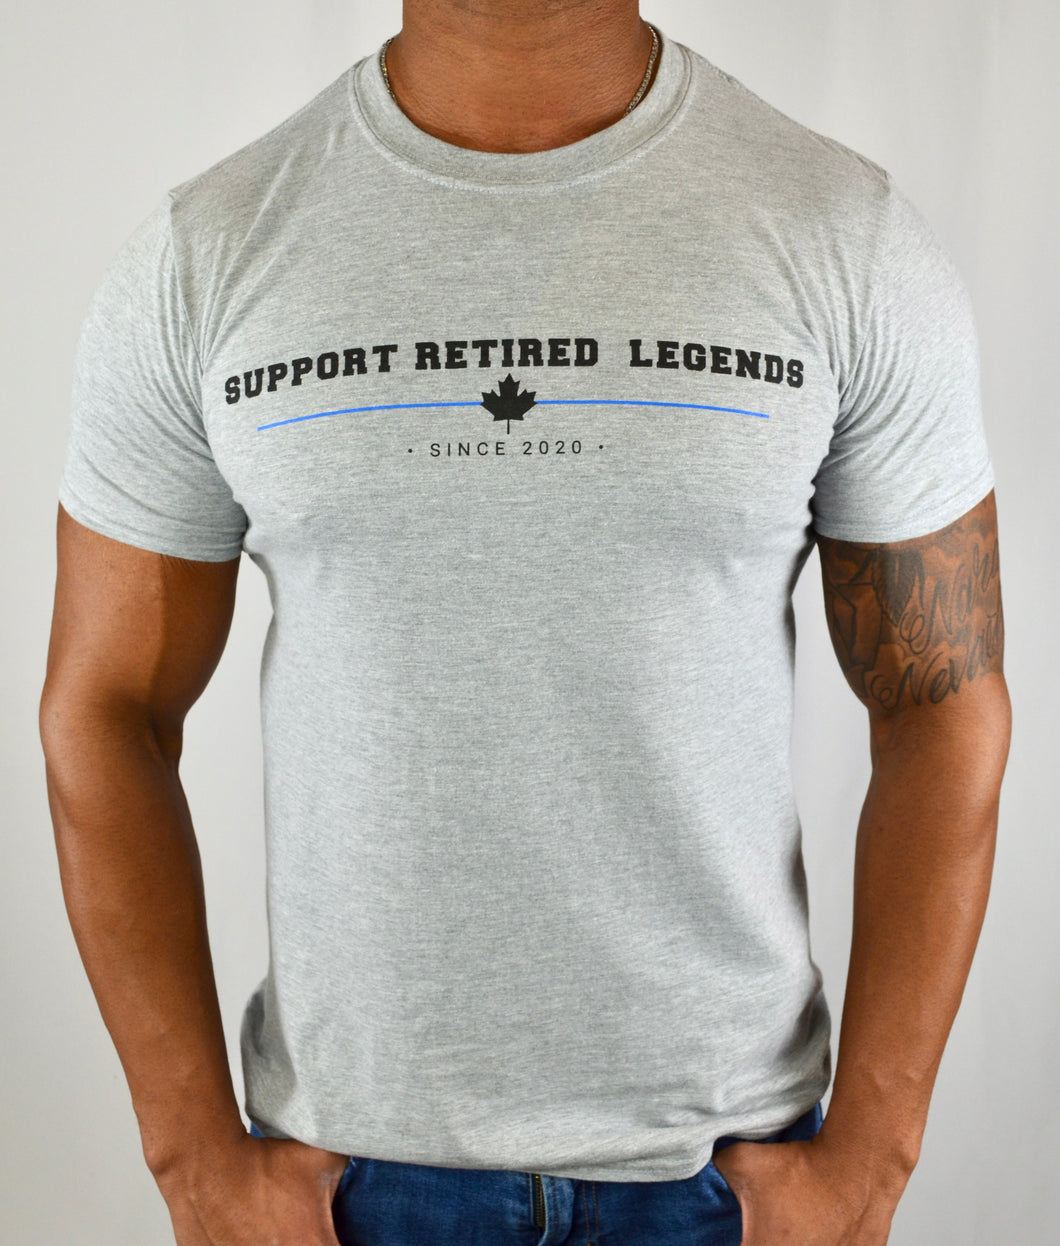 The Legends Thin Blue Line Tee